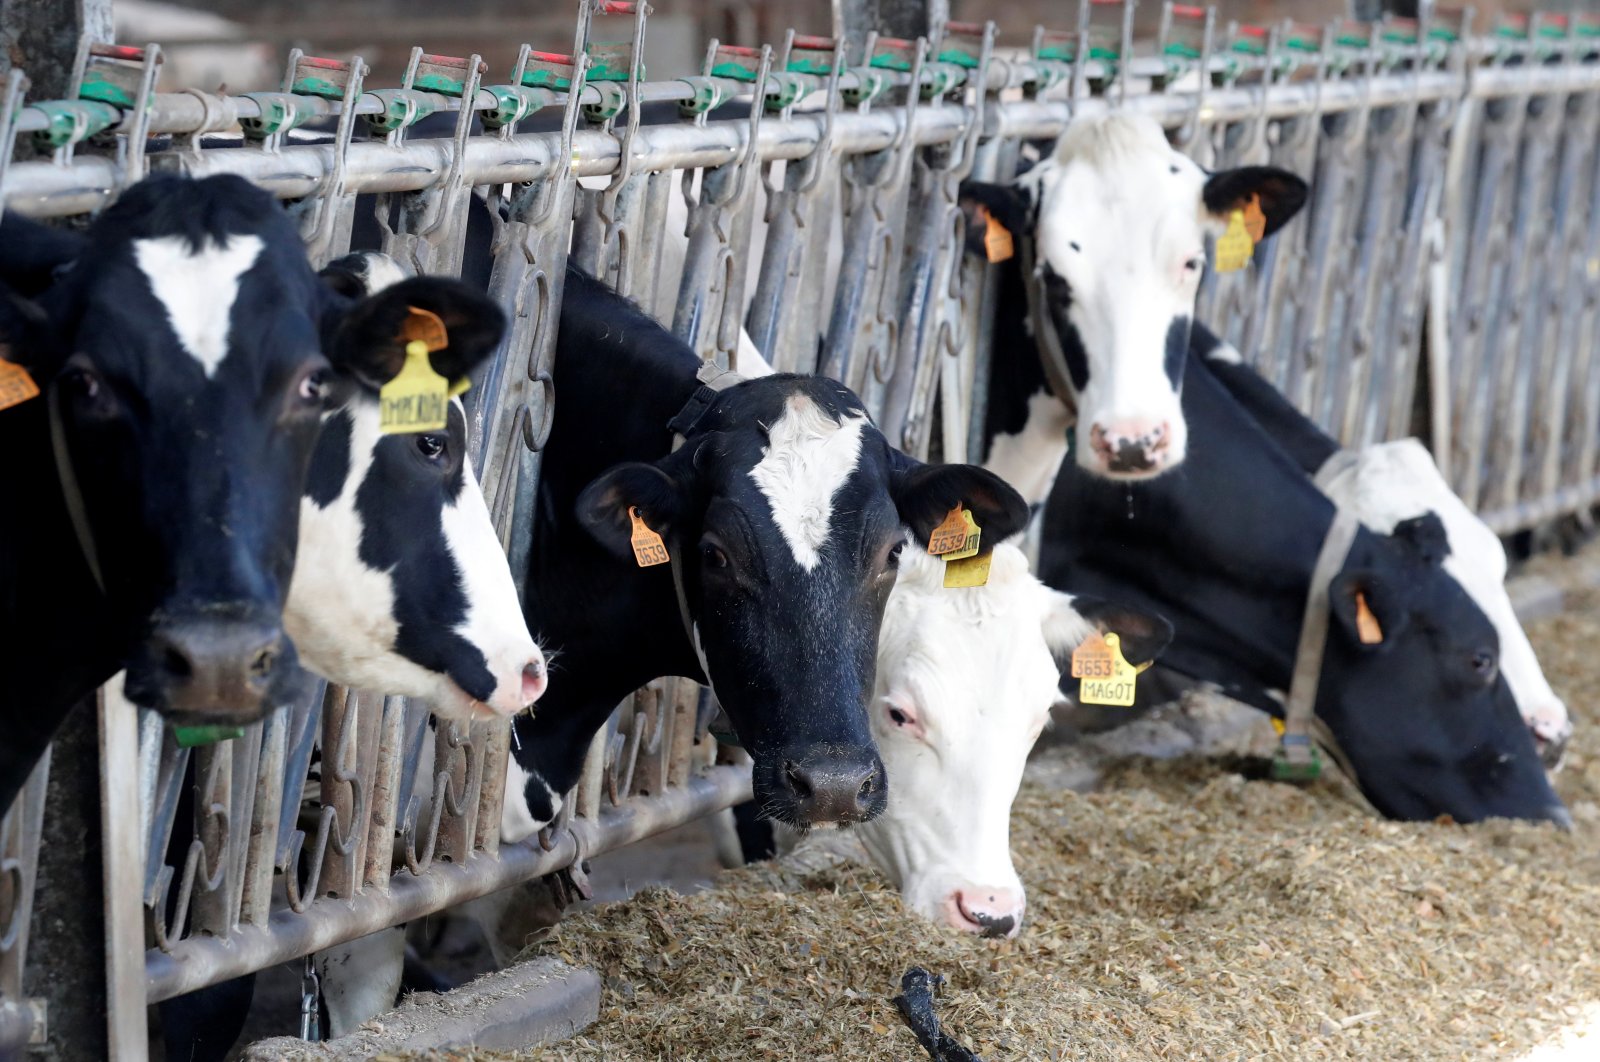 Cows eat at a dairy farm in Lizines, France, Feb. 12, 2020. (Reuters Photo)